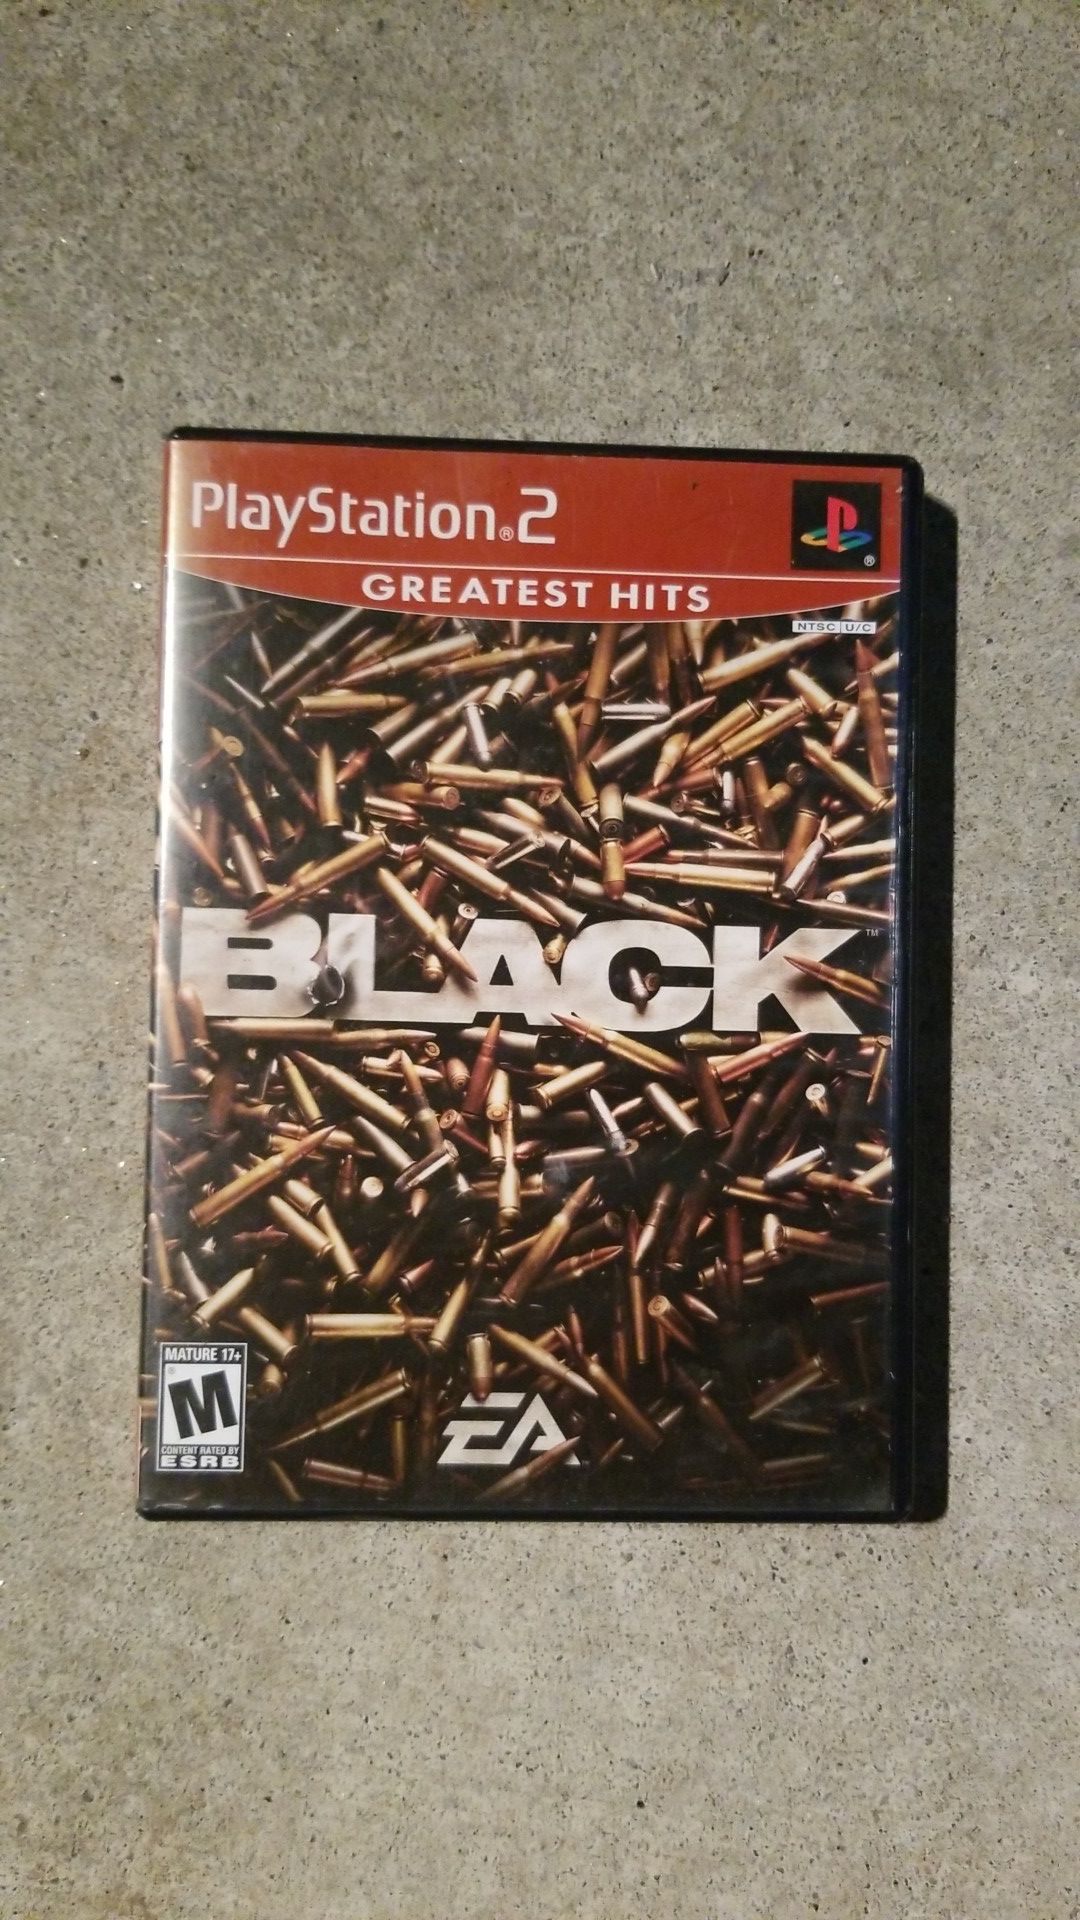 Ps2 game (black)